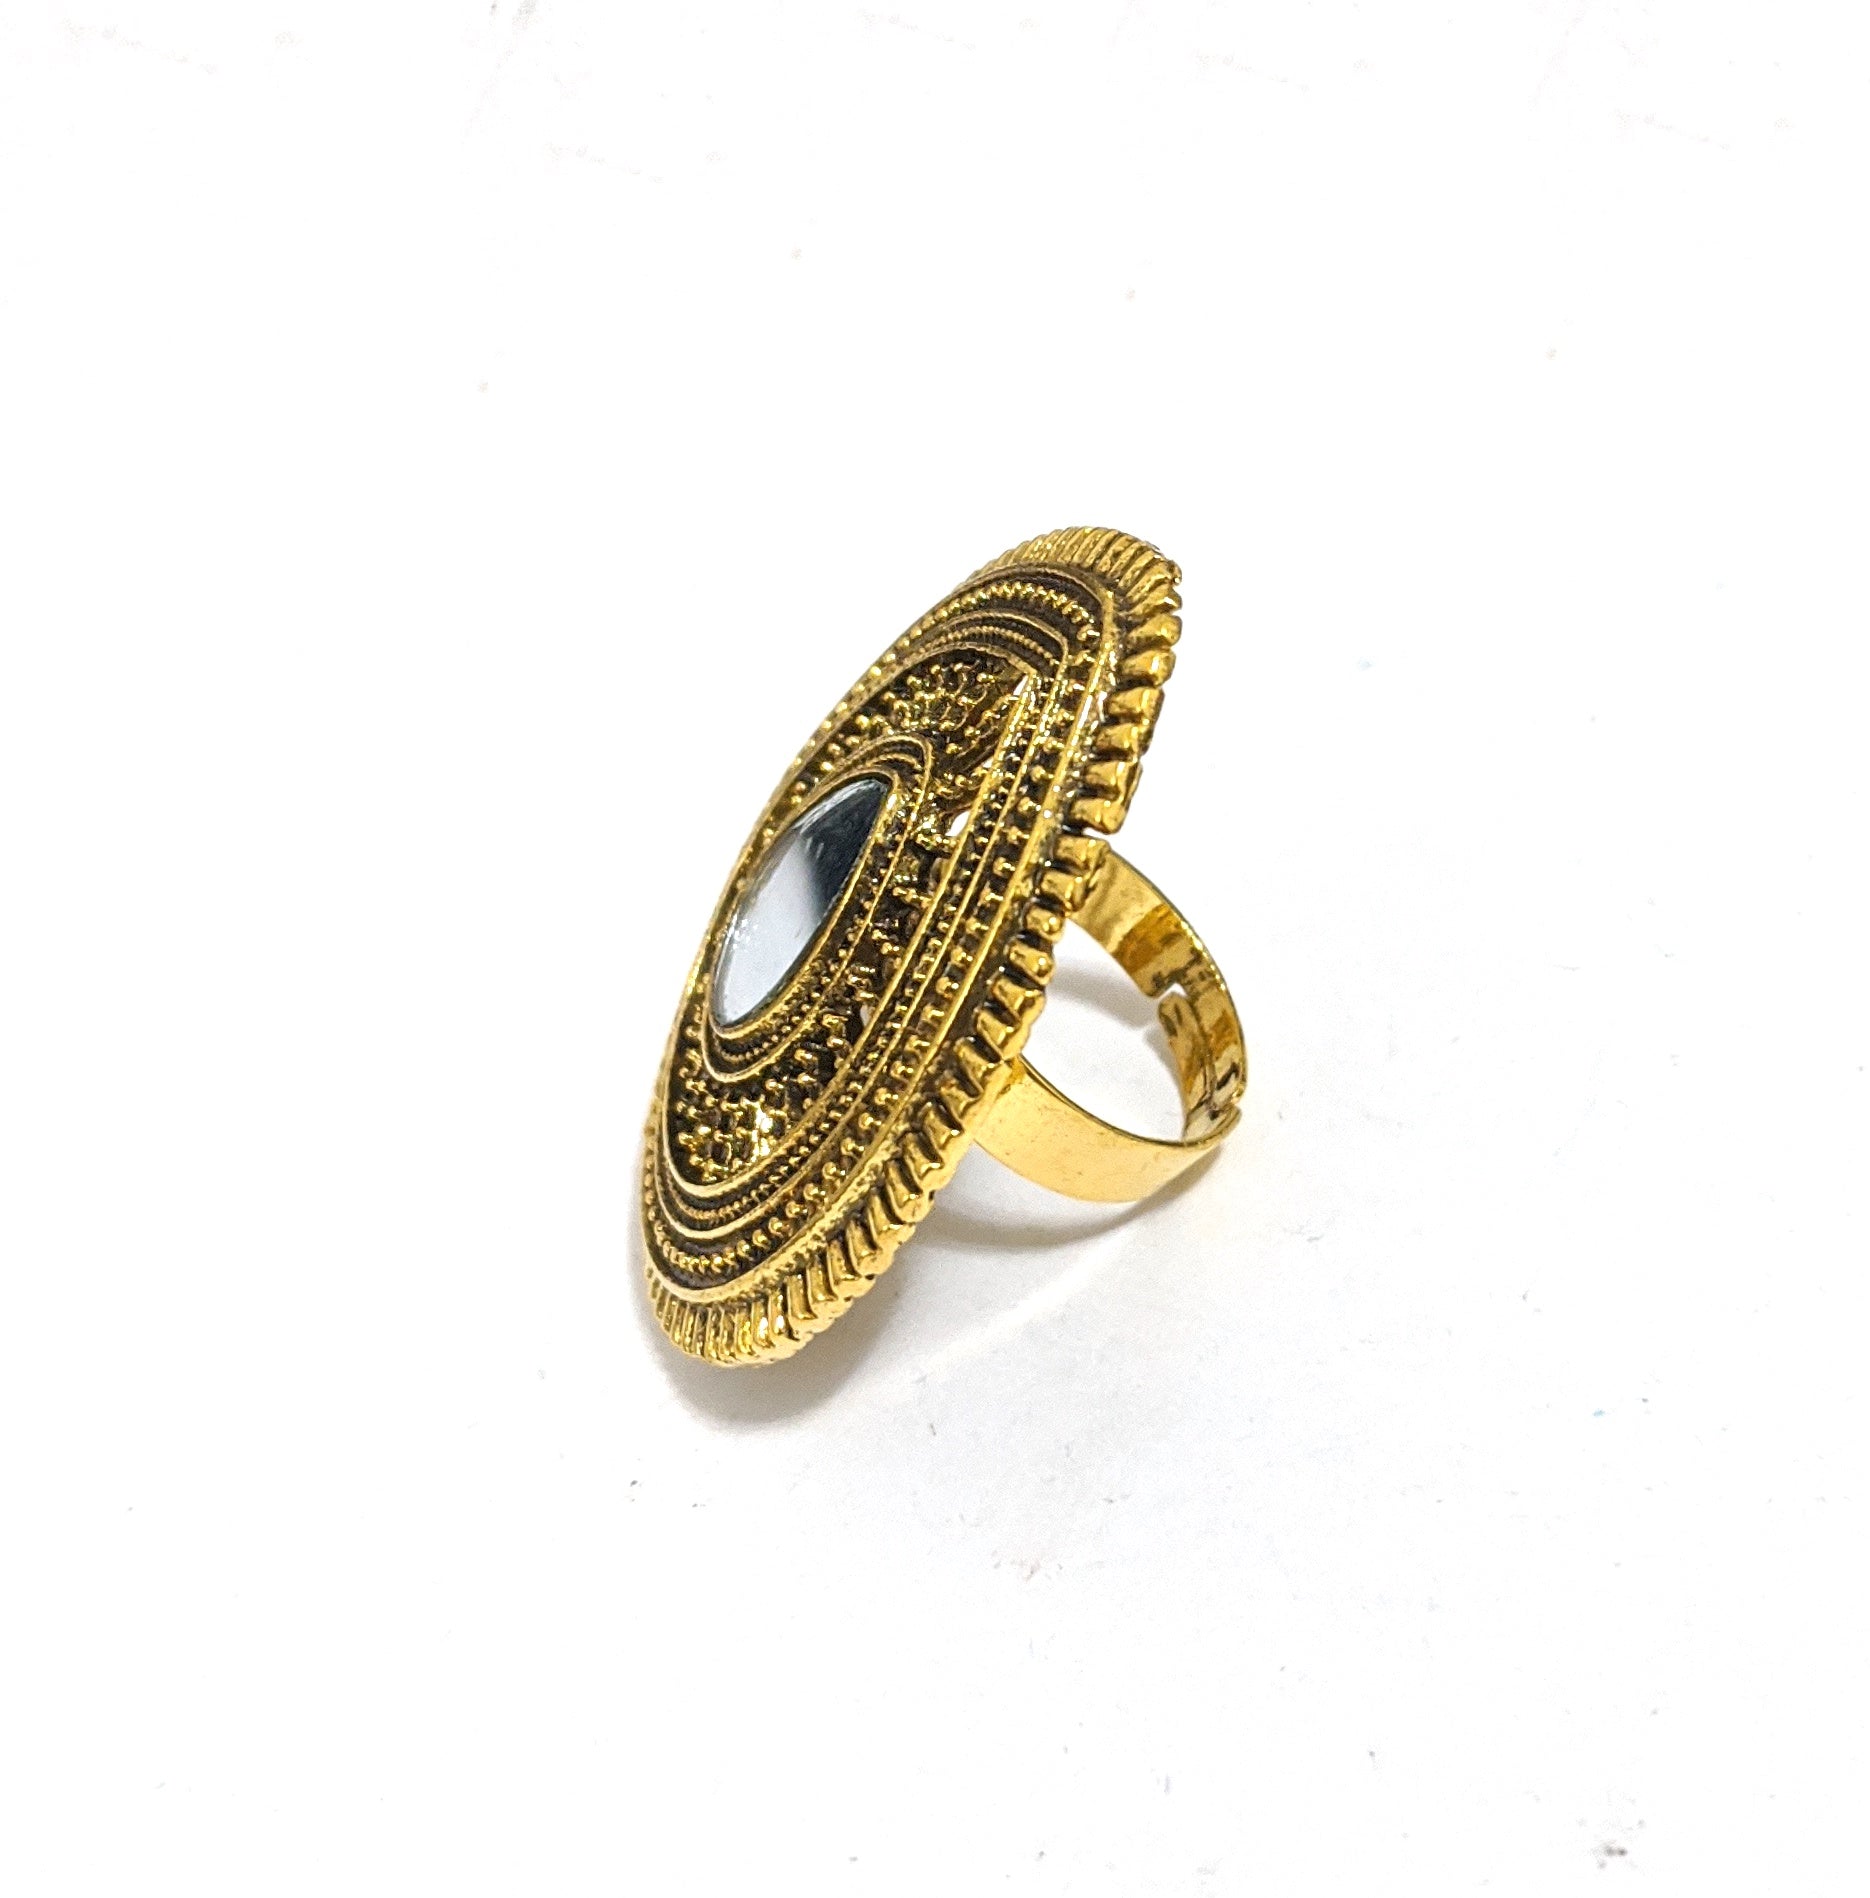 Antique Wedding Rings | Gold rings jewelry, Gold jewellery design  necklaces, Gold ring designs